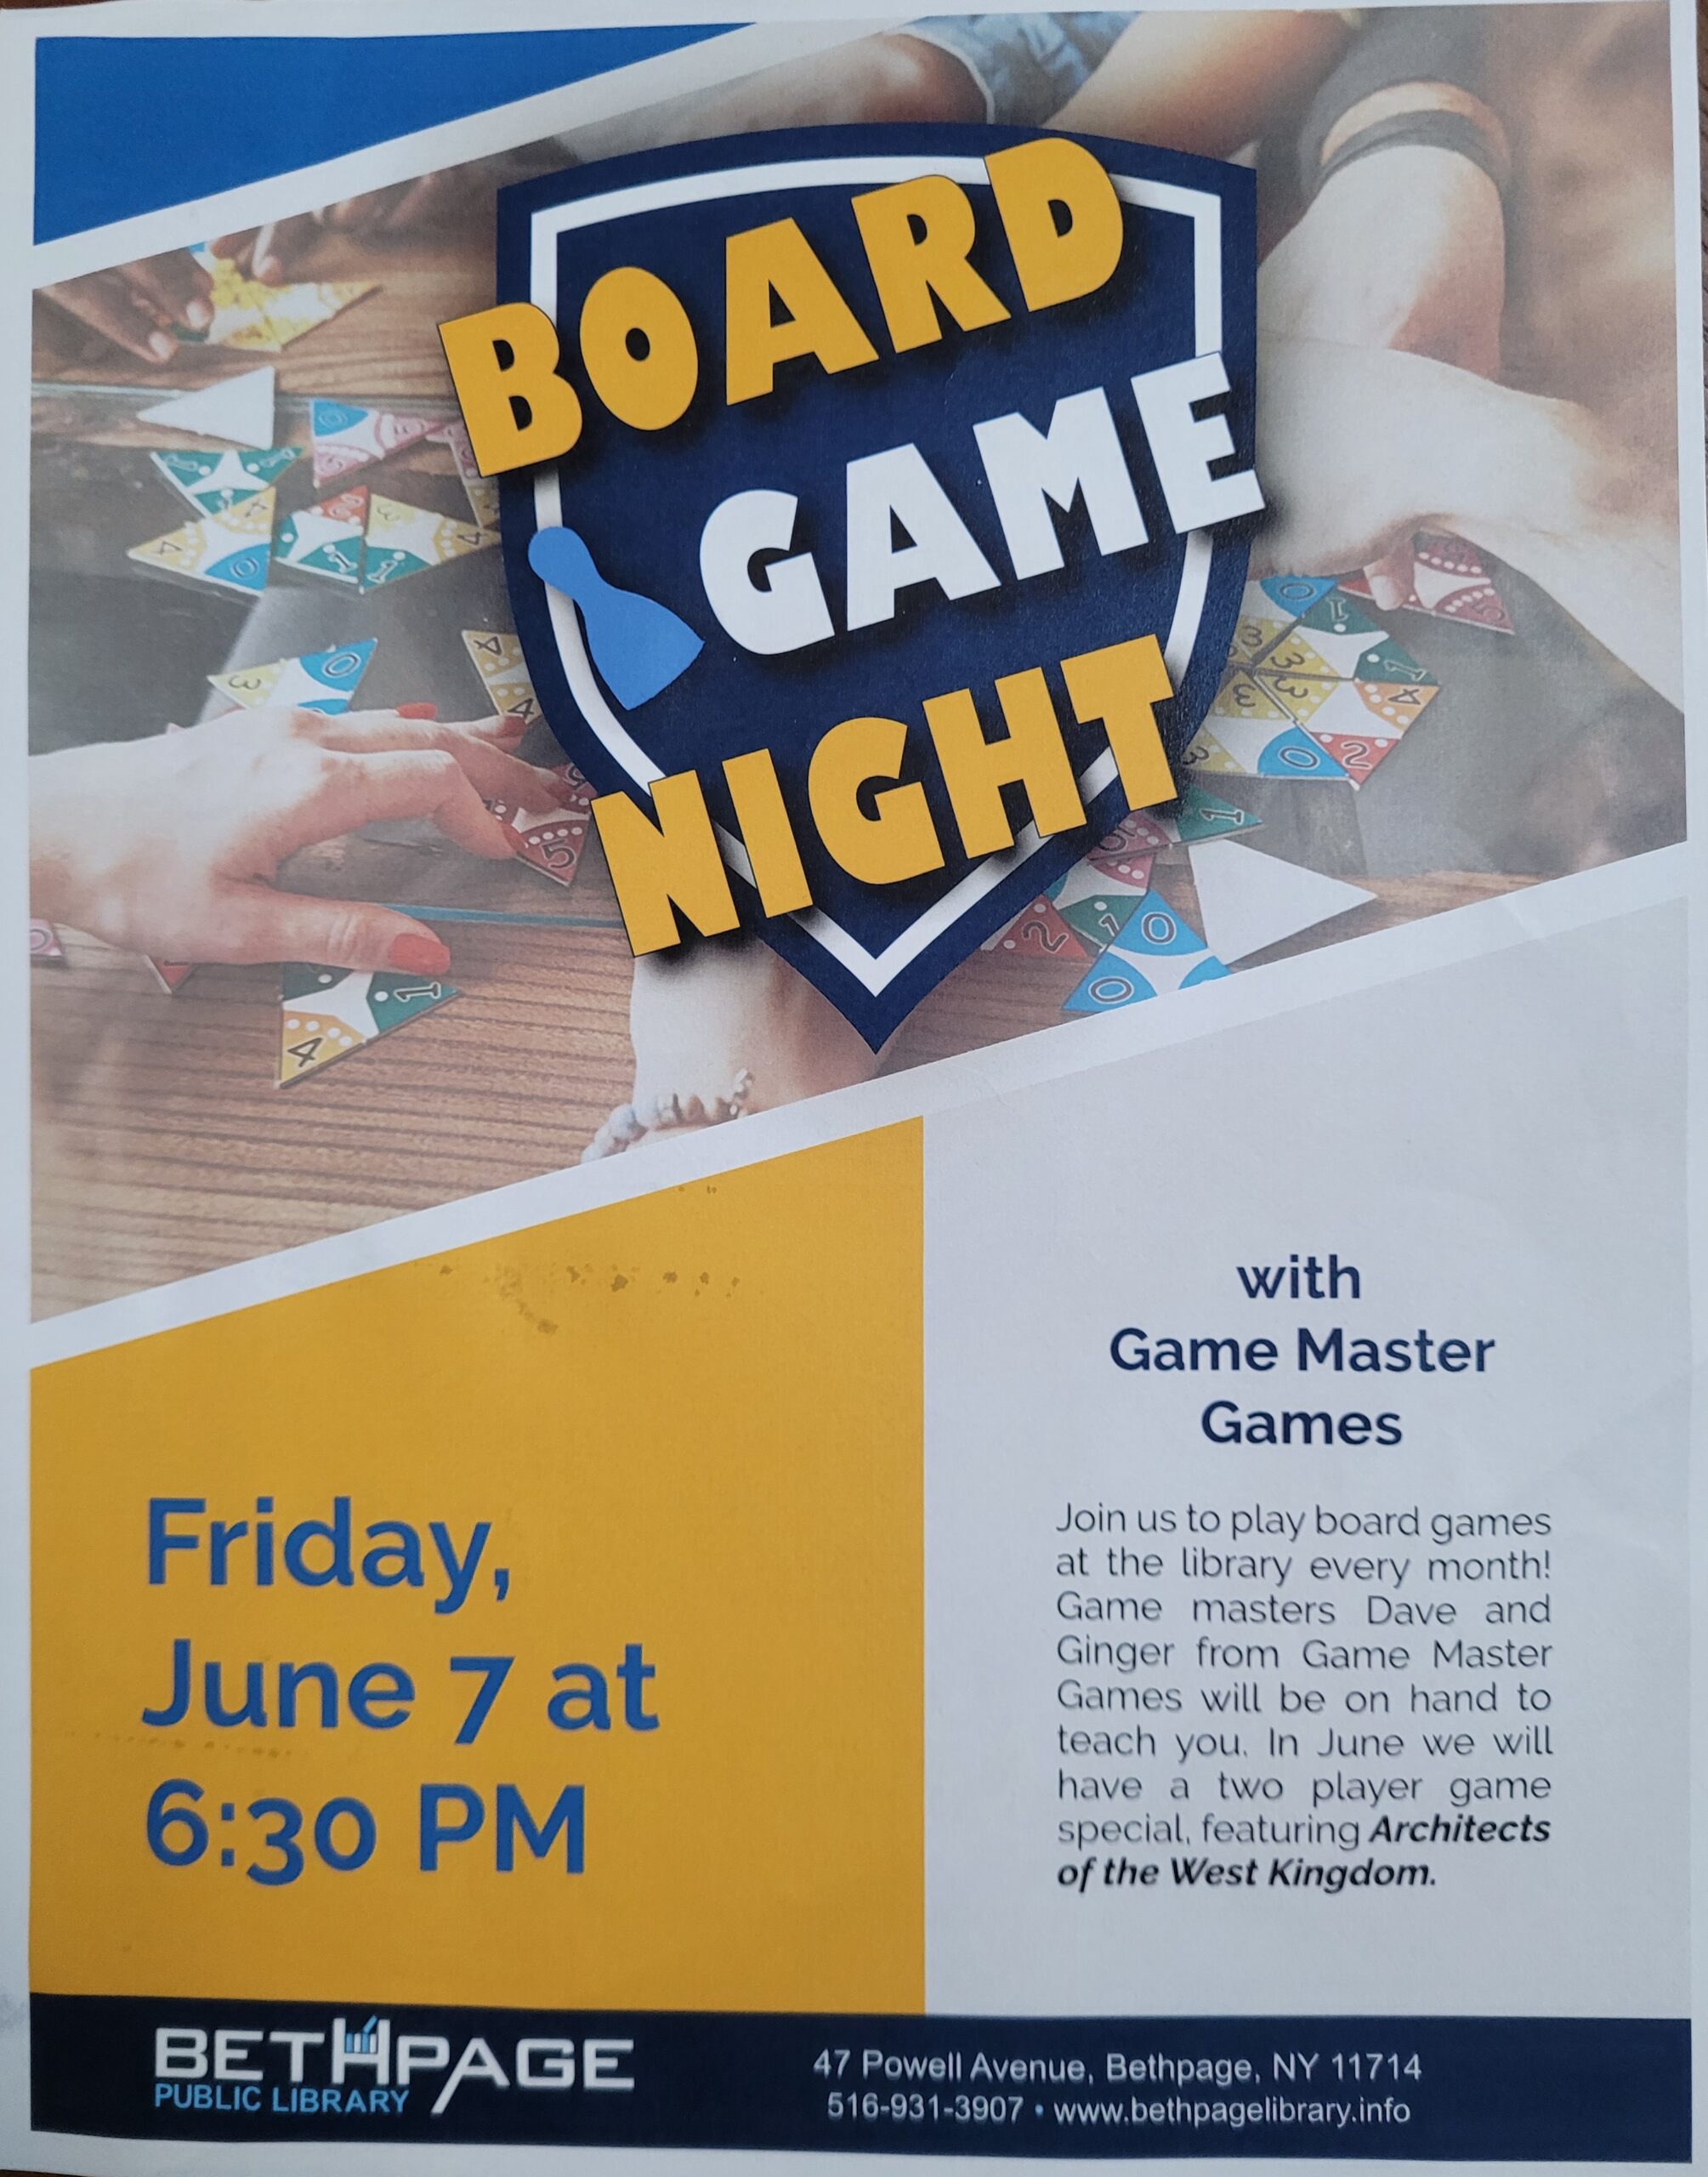 Have fun and make some new friends! Board Game Night at the Bethpage Library!